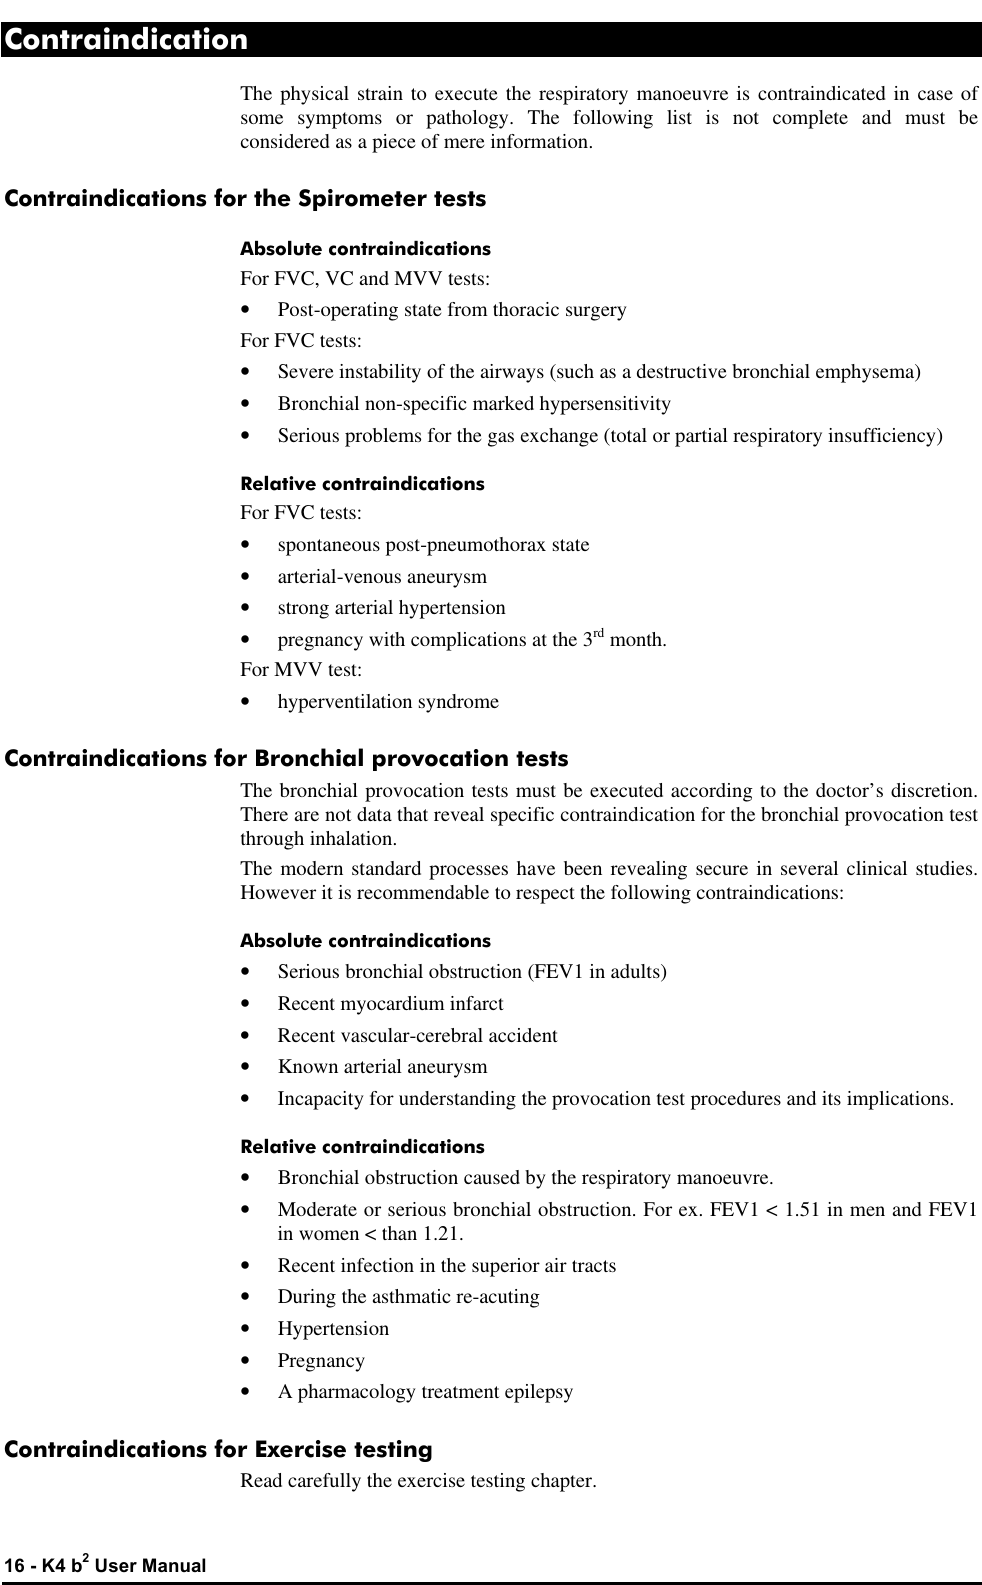  16 - K4 b2 User Manual Contraindication The physical strain to execute the respiratory manoeuvre is contraindicated in case of some symptoms or pathology. The following list is not complete and must be considered as a piece of mere information. Contraindications for the Spirometer tests Absolute contraindications For FVC, VC and MVV tests: • Post-operating state from thoracic surgery For FVC tests: • Severe instability of the airways (such as a destructive bronchial emphysema) • Bronchial non-specific marked hypersensitivity • Serious problems for the gas exchange (total or partial respiratory insufficiency) Relative contraindications For FVC tests: • spontaneous post-pneumothorax state • arterial-venous aneurysm • strong arterial hypertension • pregnancy with complications at the 3rd month. For MVV test: • hyperventilation syndrome Contraindications for Bronchial provocation tests The bronchial provocation tests must be executed according to the doctor’s discretion. There are not data that reveal specific contraindication for the bronchial provocation test through inhalation. The modern standard processes have been revealing secure in several clinical studies. However it is recommendable to respect the following contraindications: Absolute contraindications • Serious bronchial obstruction (FEV1 in adults) • Recent myocardium infarct • Recent vascular-cerebral accident • Known arterial aneurysm • Incapacity for understanding the provocation test procedures and its implications. Relative contraindications • Bronchial obstruction caused by the respiratory manoeuvre. • Moderate or serious bronchial obstruction. For ex. FEV1 &lt; 1.51 in men and FEV1 in women &lt; than 1.21. • Recent infection in the superior air tracts • During the asthmatic re-acuting • Hypertension • Pregnancy • A pharmacology treatment epilepsy Contraindications for Exercise testing Read carefully the exercise testing chapter. 